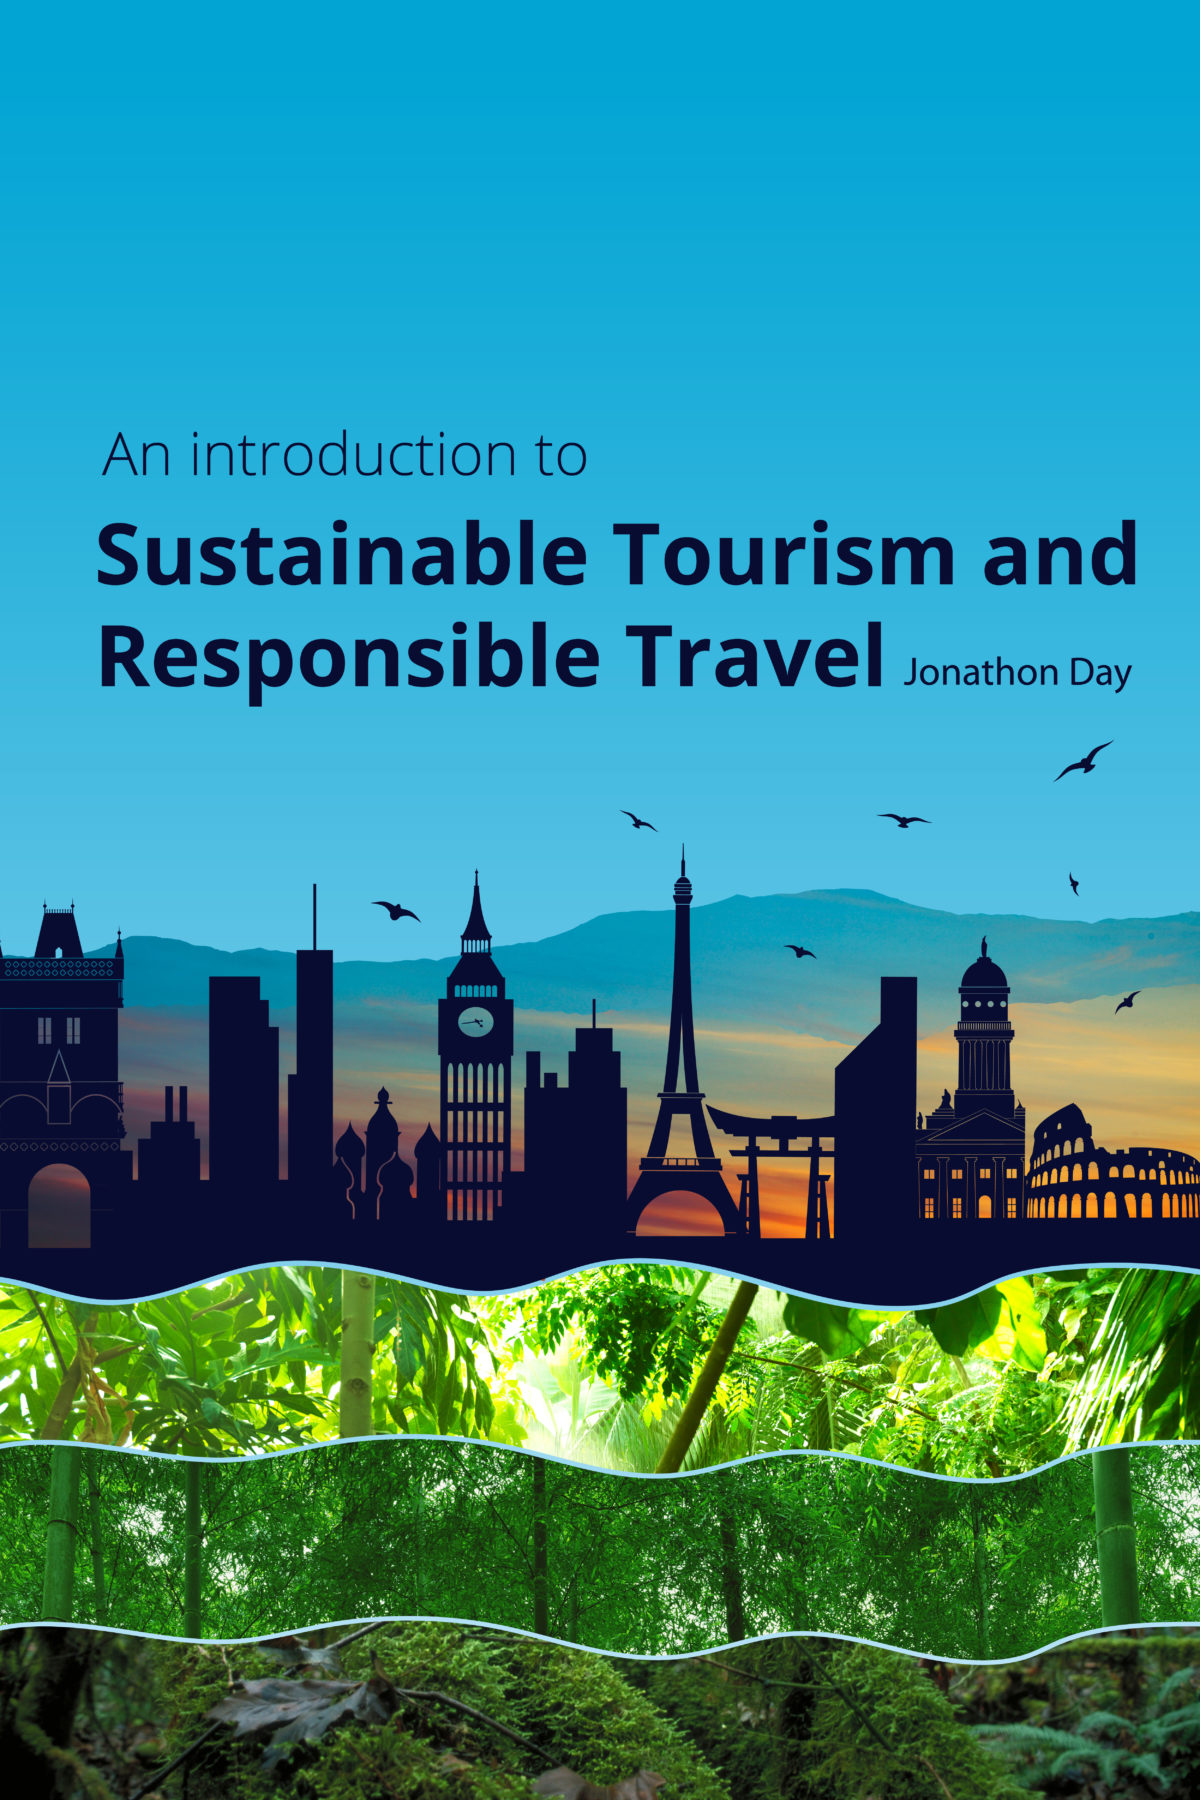 research topic about sustainable tourism